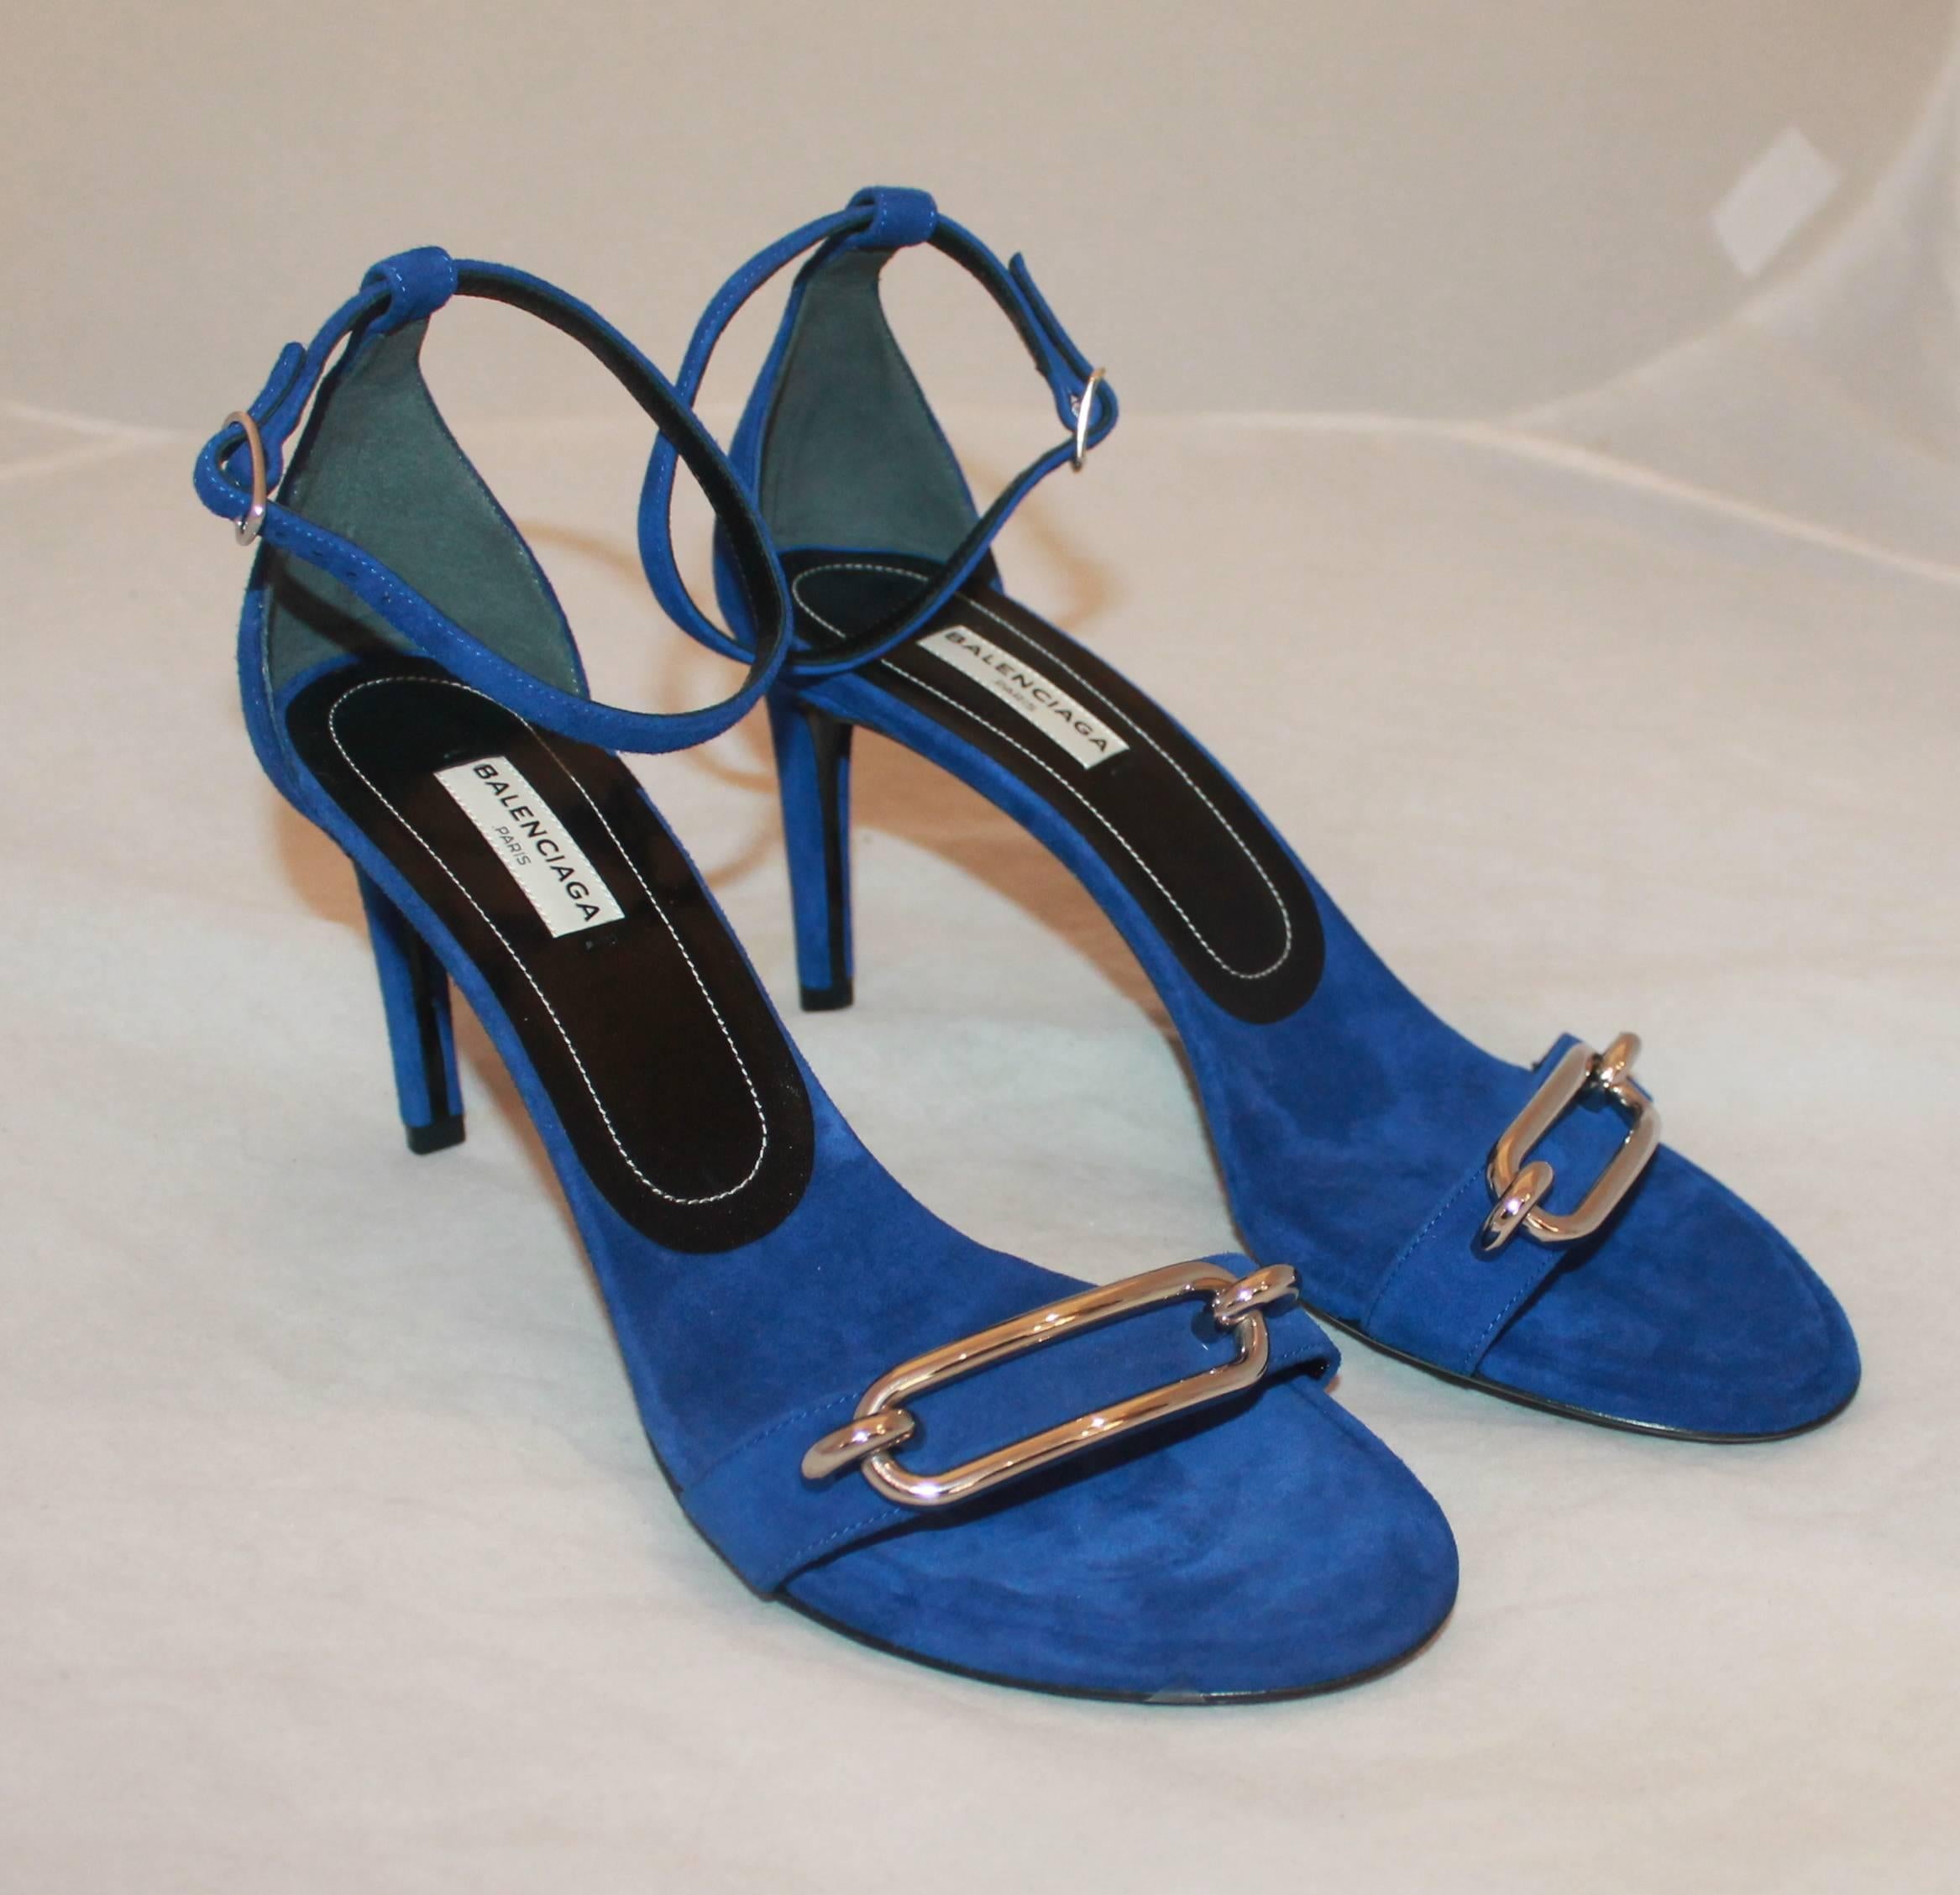 Balenciaga Electric Blue Suede Heels with Ankle Strap and Silver Buckle - 38.5.  These suede heels are an electric blue and have an ankle strap. On the front, they have a silver buckle. They are in new condition.

Measurements:
Heel- 3.25